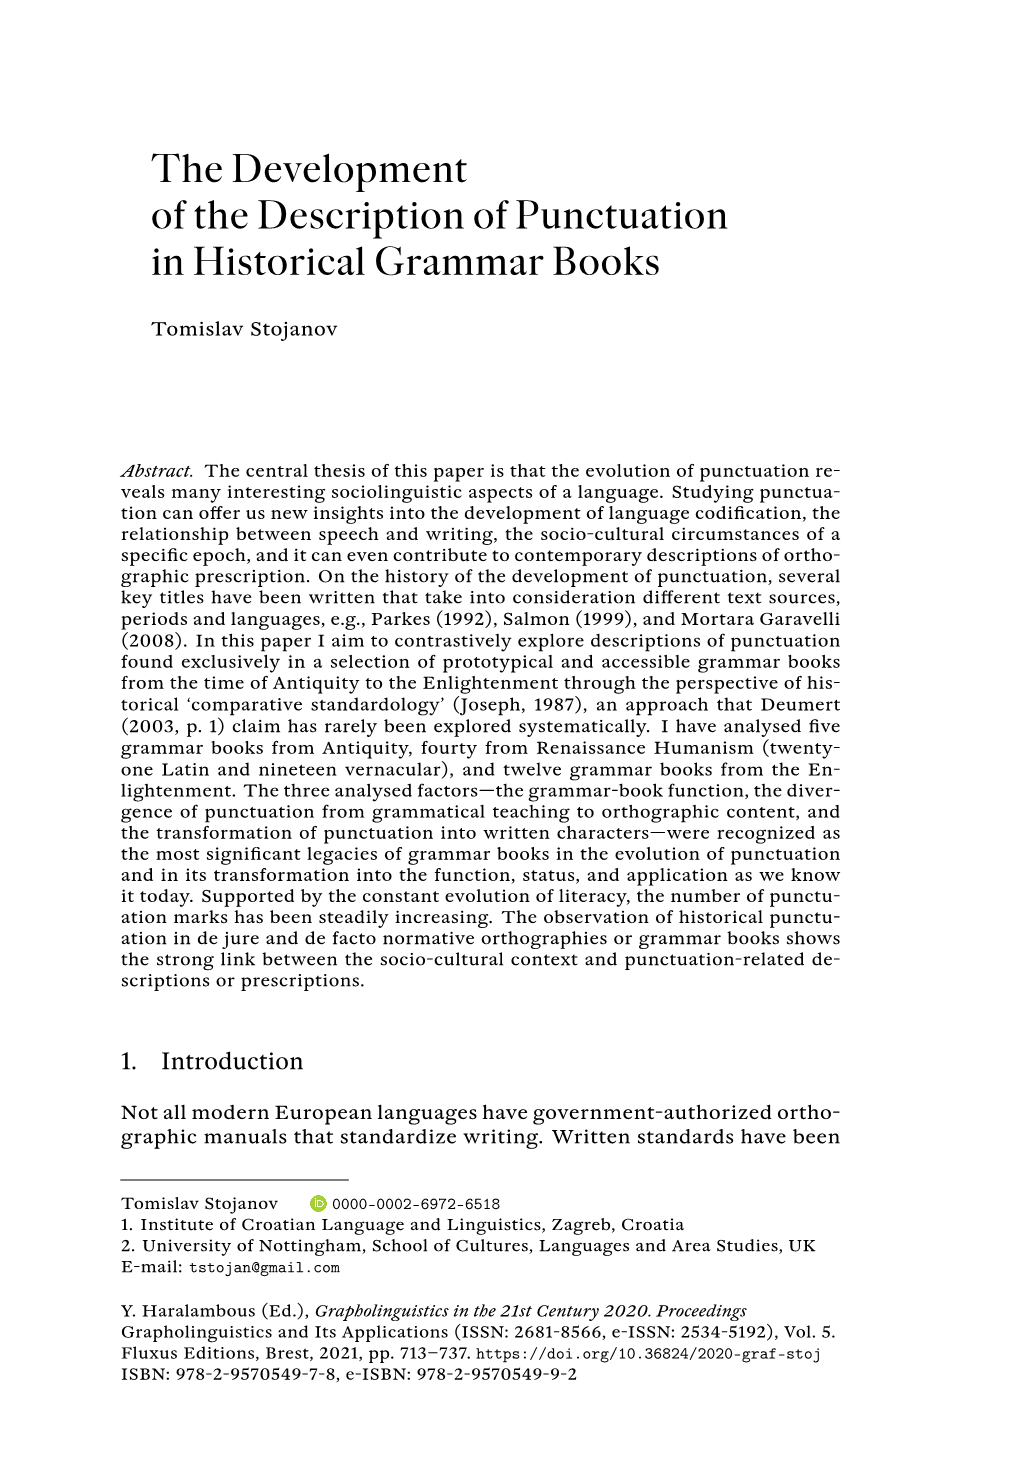 The Development of the Description of Punctuation in Historical Grammar Books